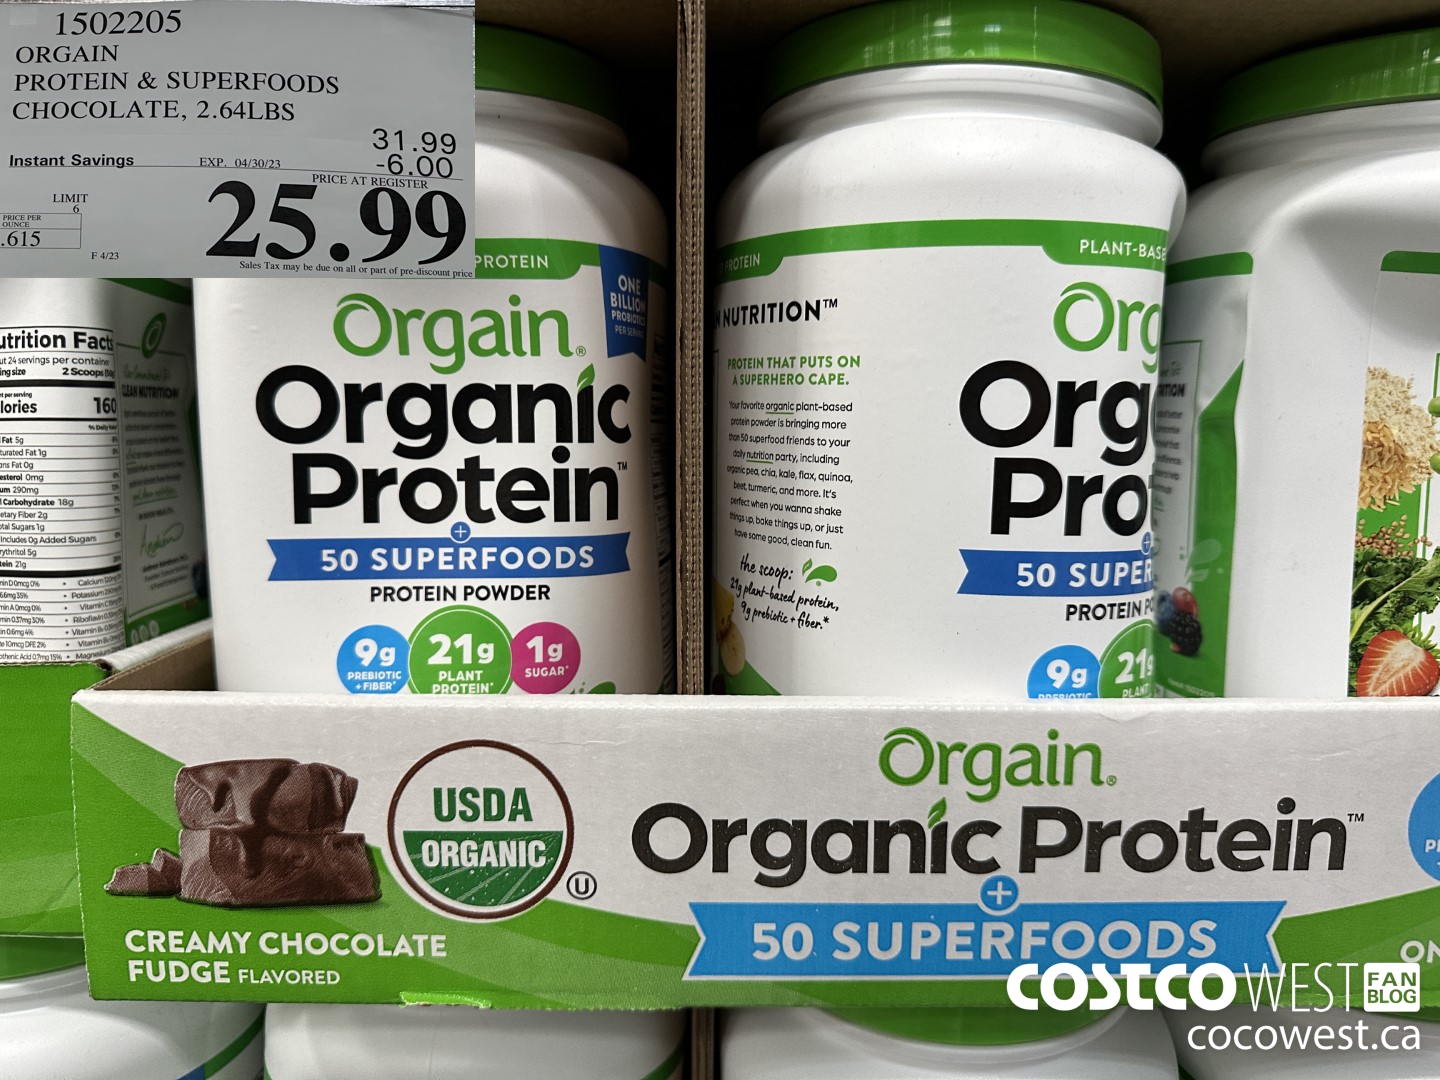 https://west.cocowest1.ca/2023/04/ORGAIN_PROTEIN_SUPERFOODS_CHOCOLATE_264_LBS_20230418_121750.jpg